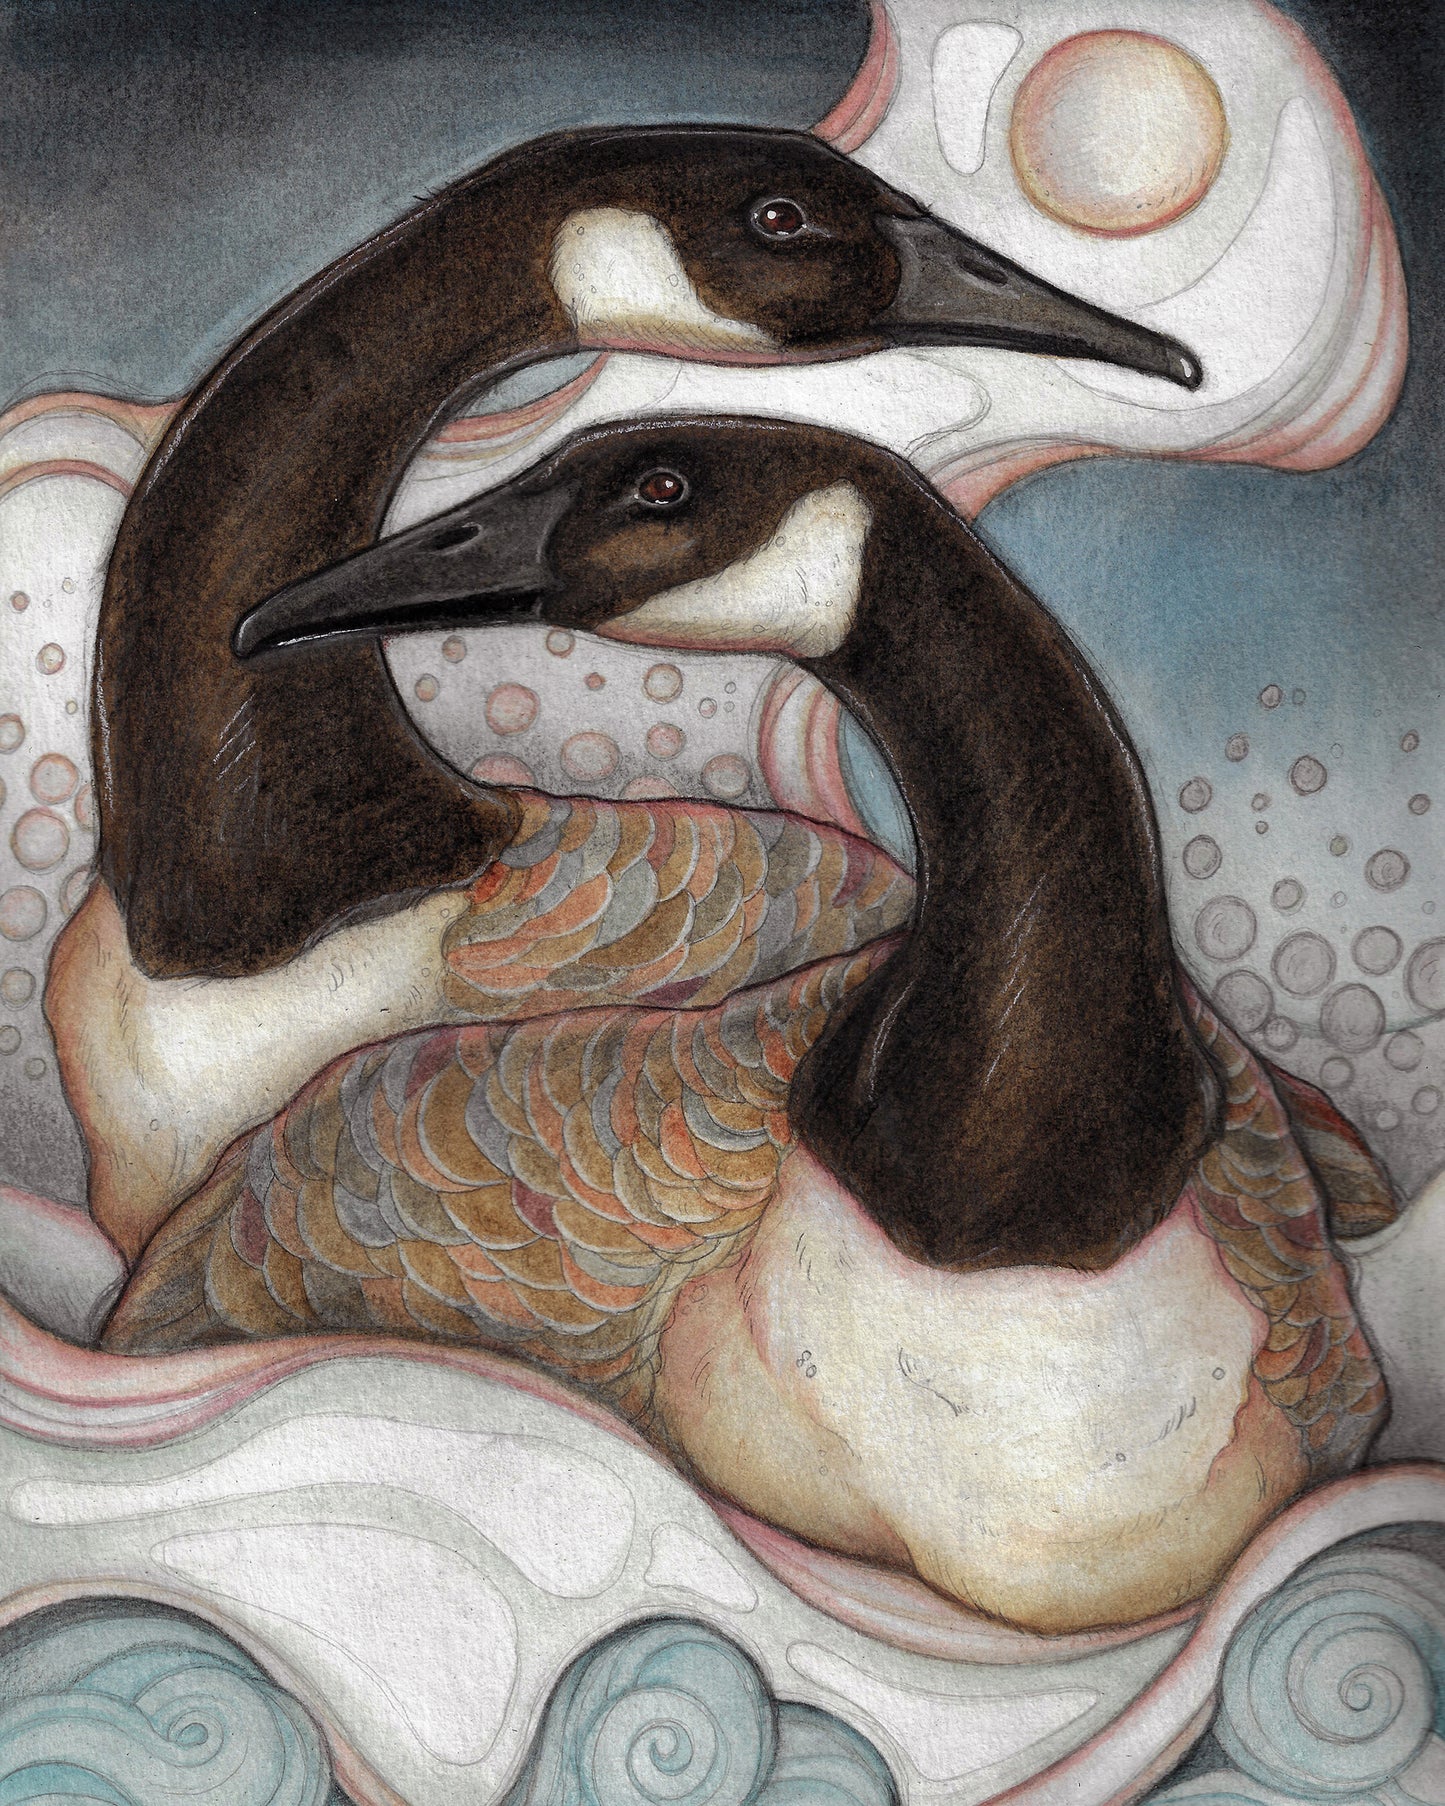 An illustrated art print of two stylized canadian geese sitting in the snow.  Water swirls beneath the snow.